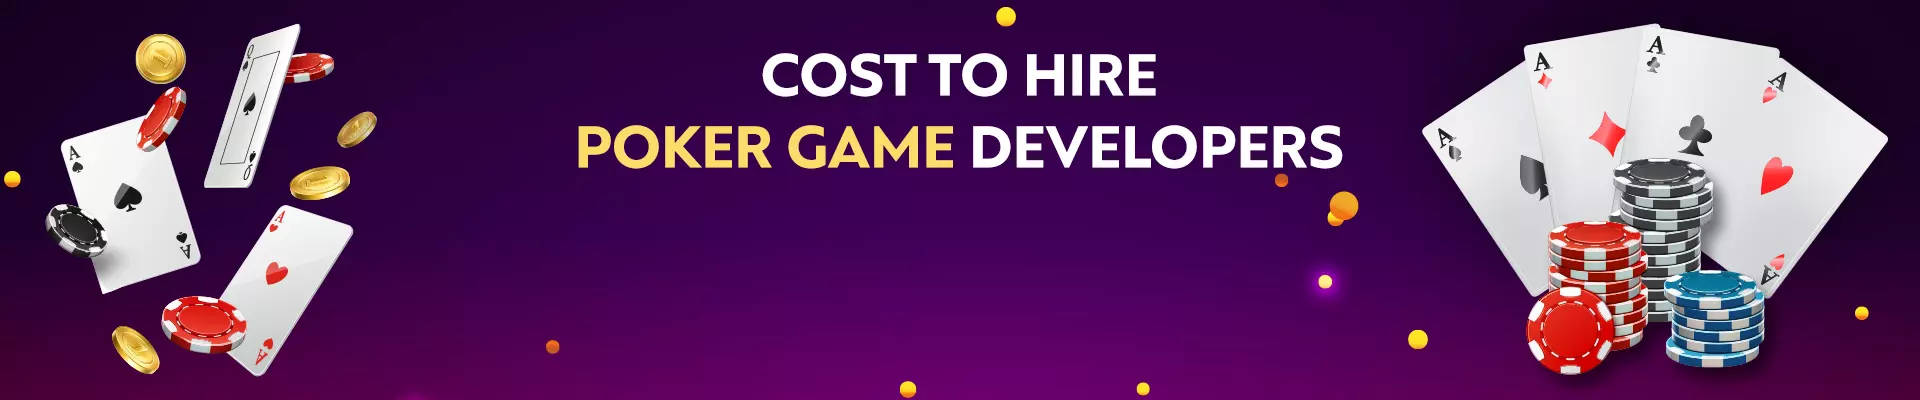 Cost to Hire Poker Game Developers